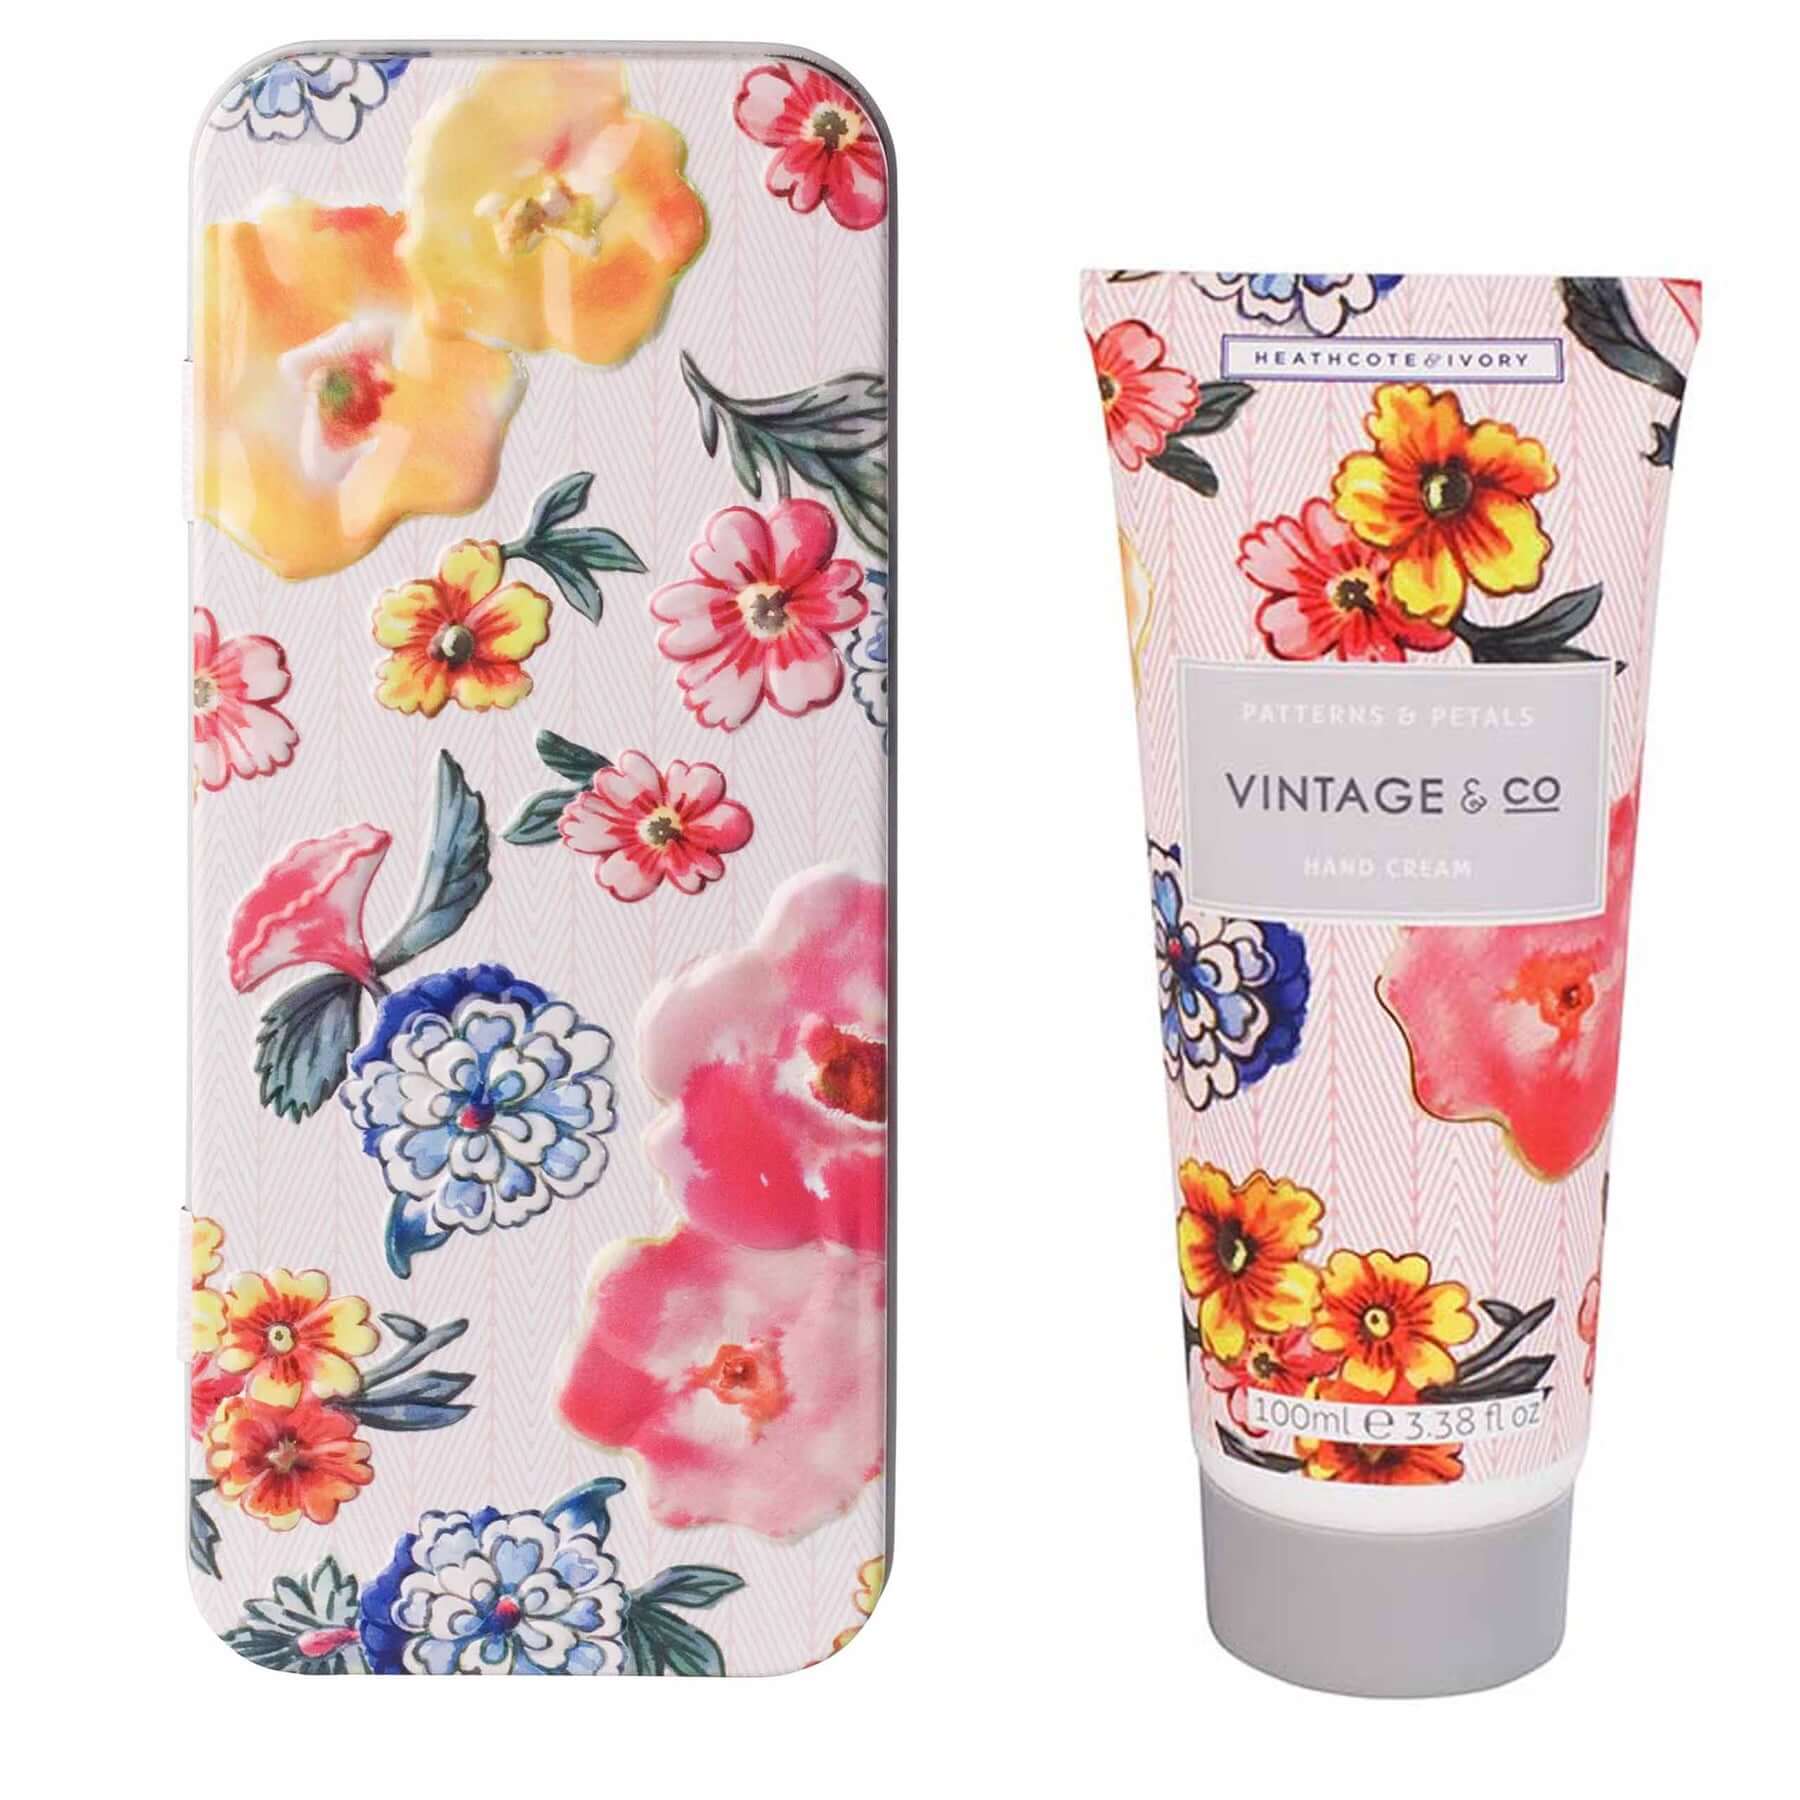 Vintage & Co Patterns & Petals Hand Cream in Tin